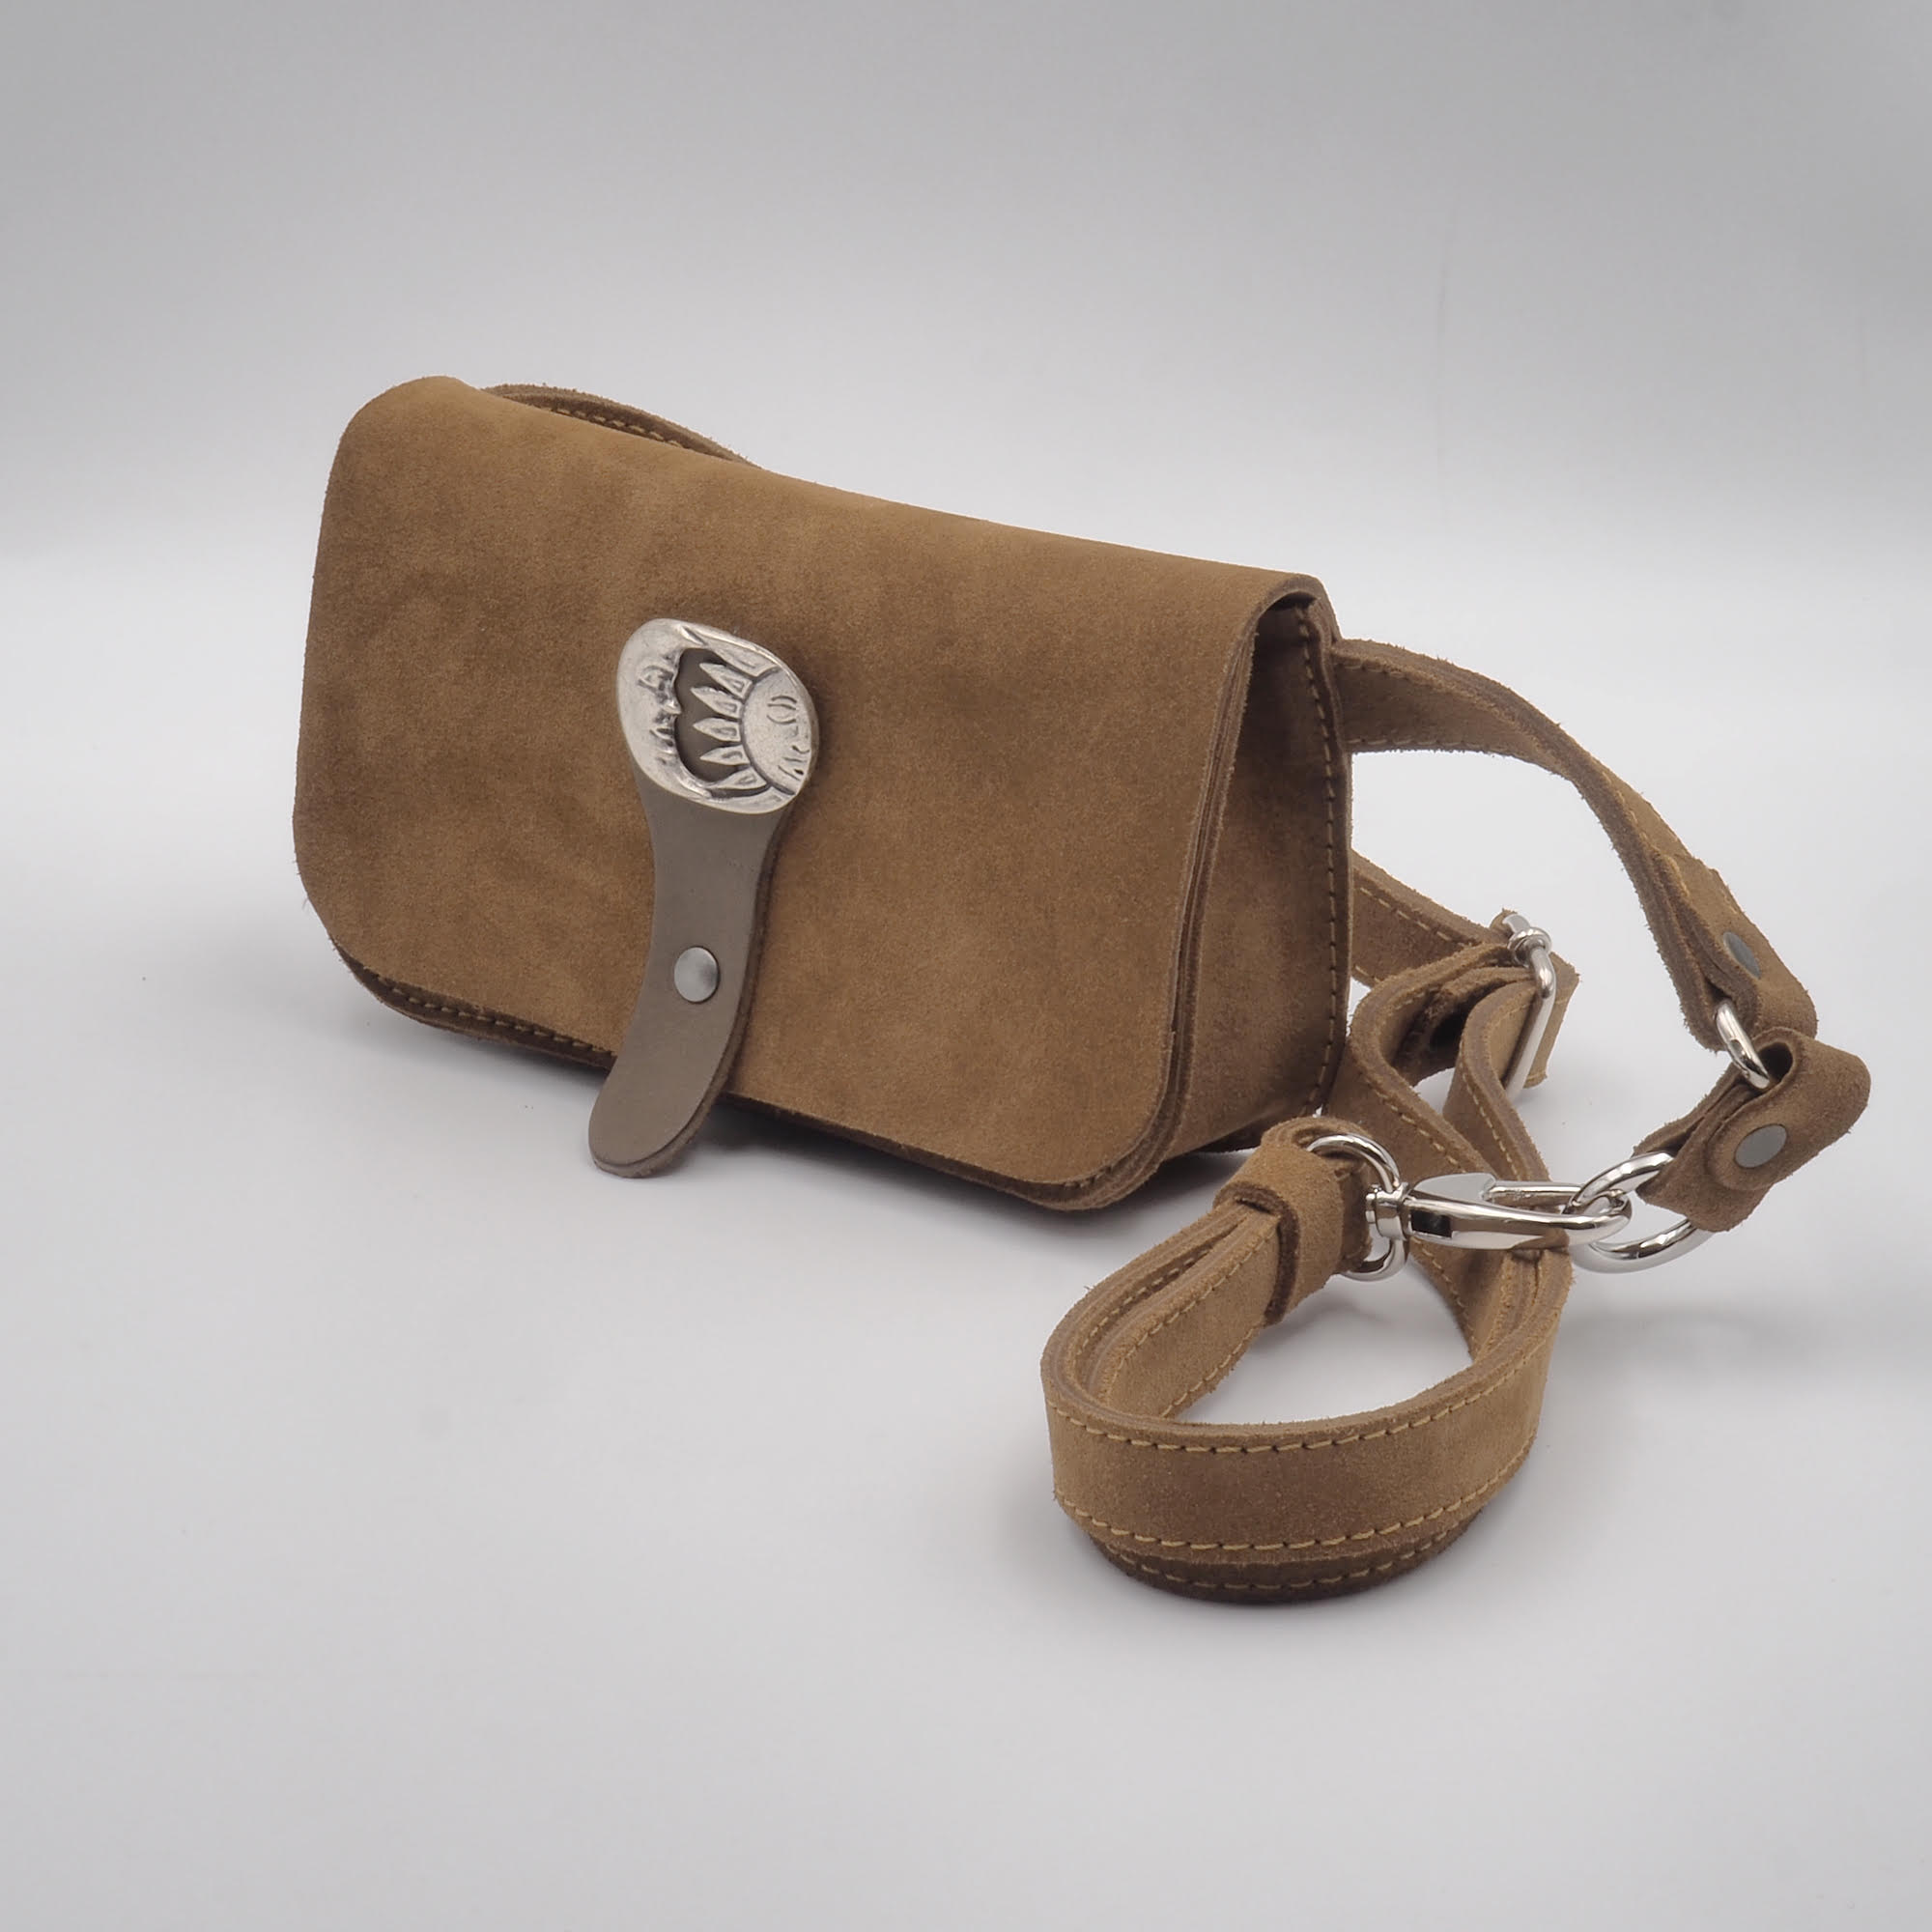 HUGS WAIST BAG brown thick suede leather